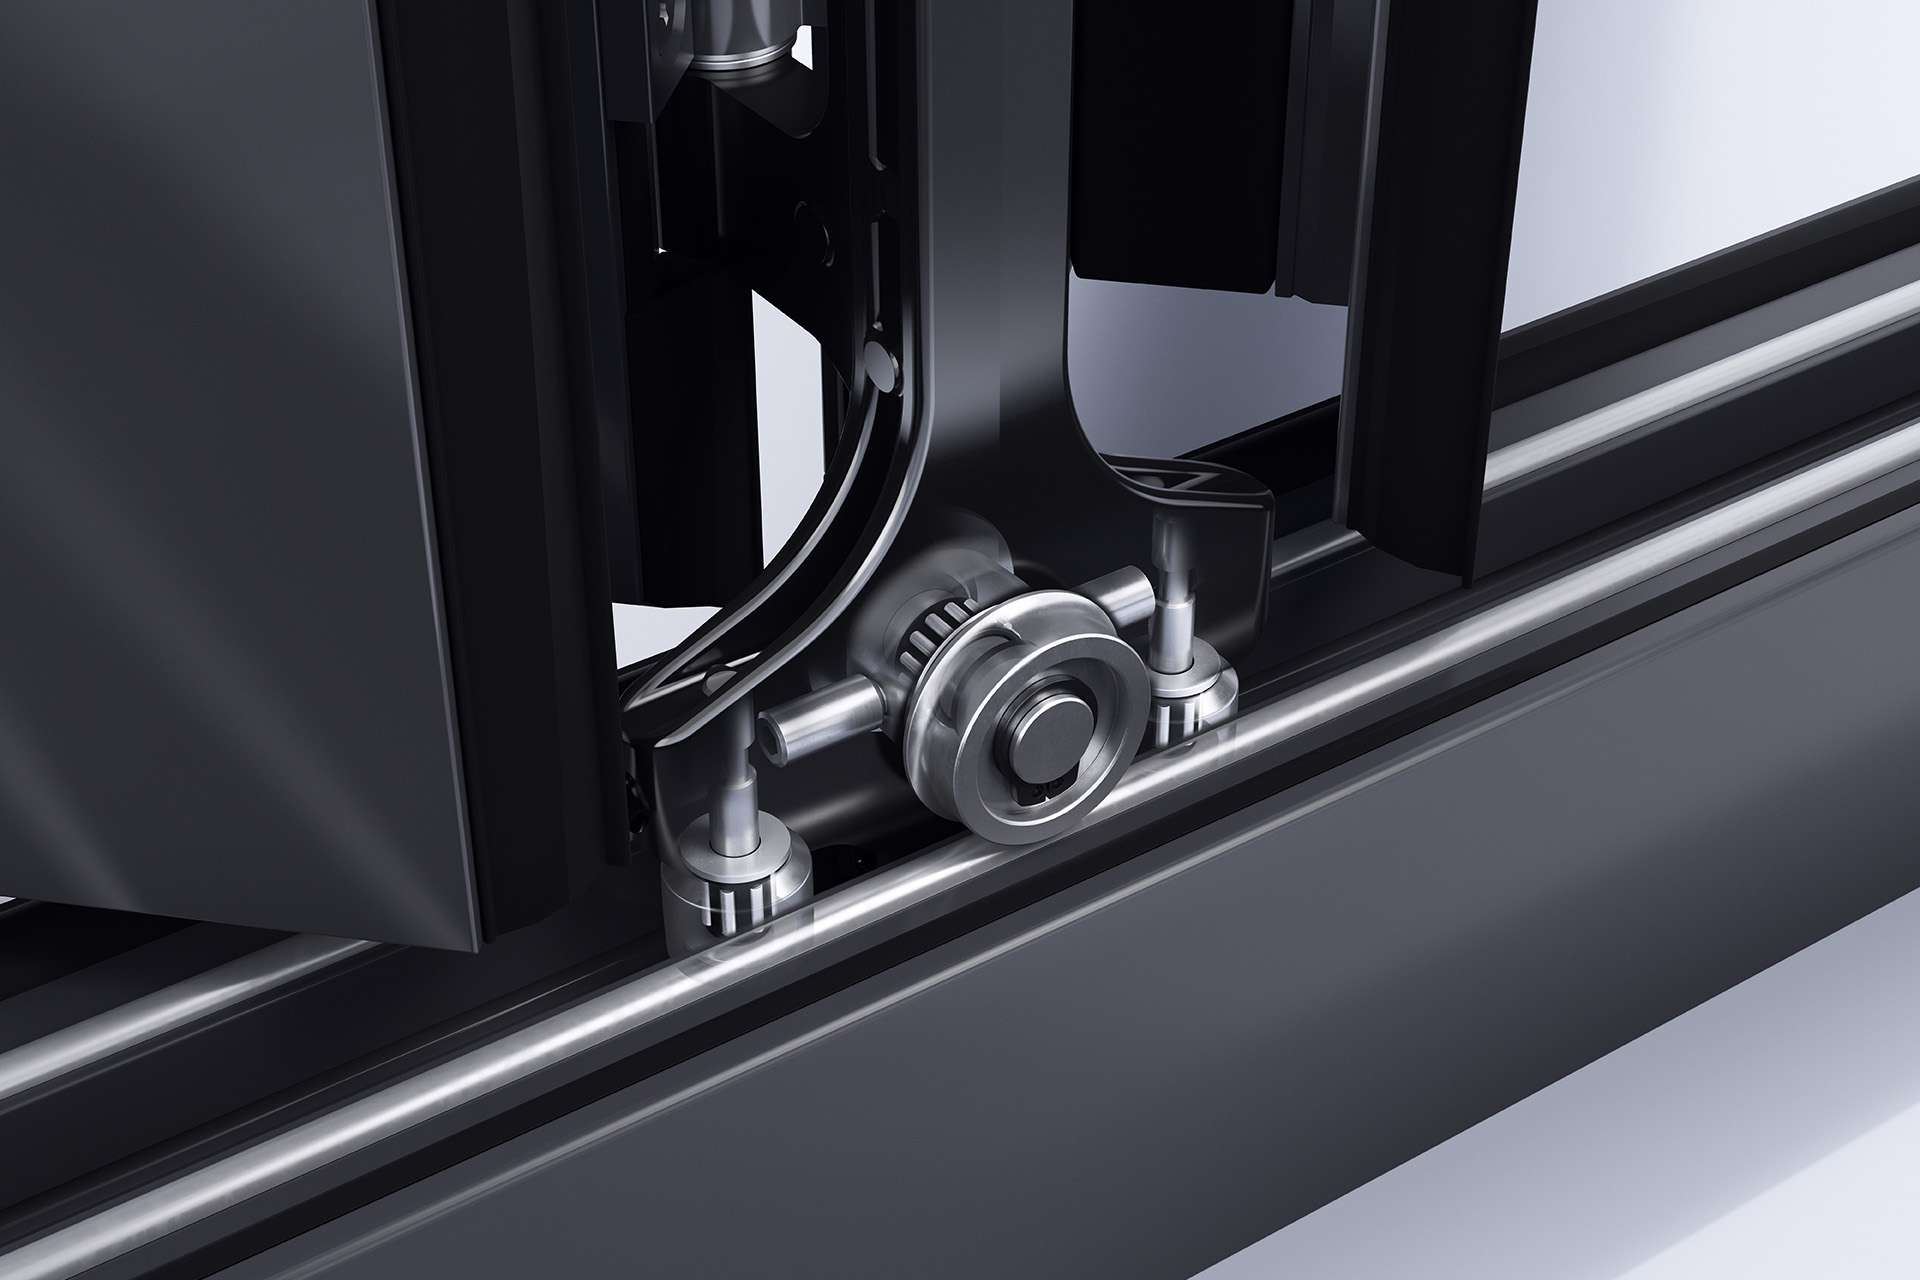 A full close up of the Korniche bi-folding door rollers sitting on the track showing the detail of the mechanism.